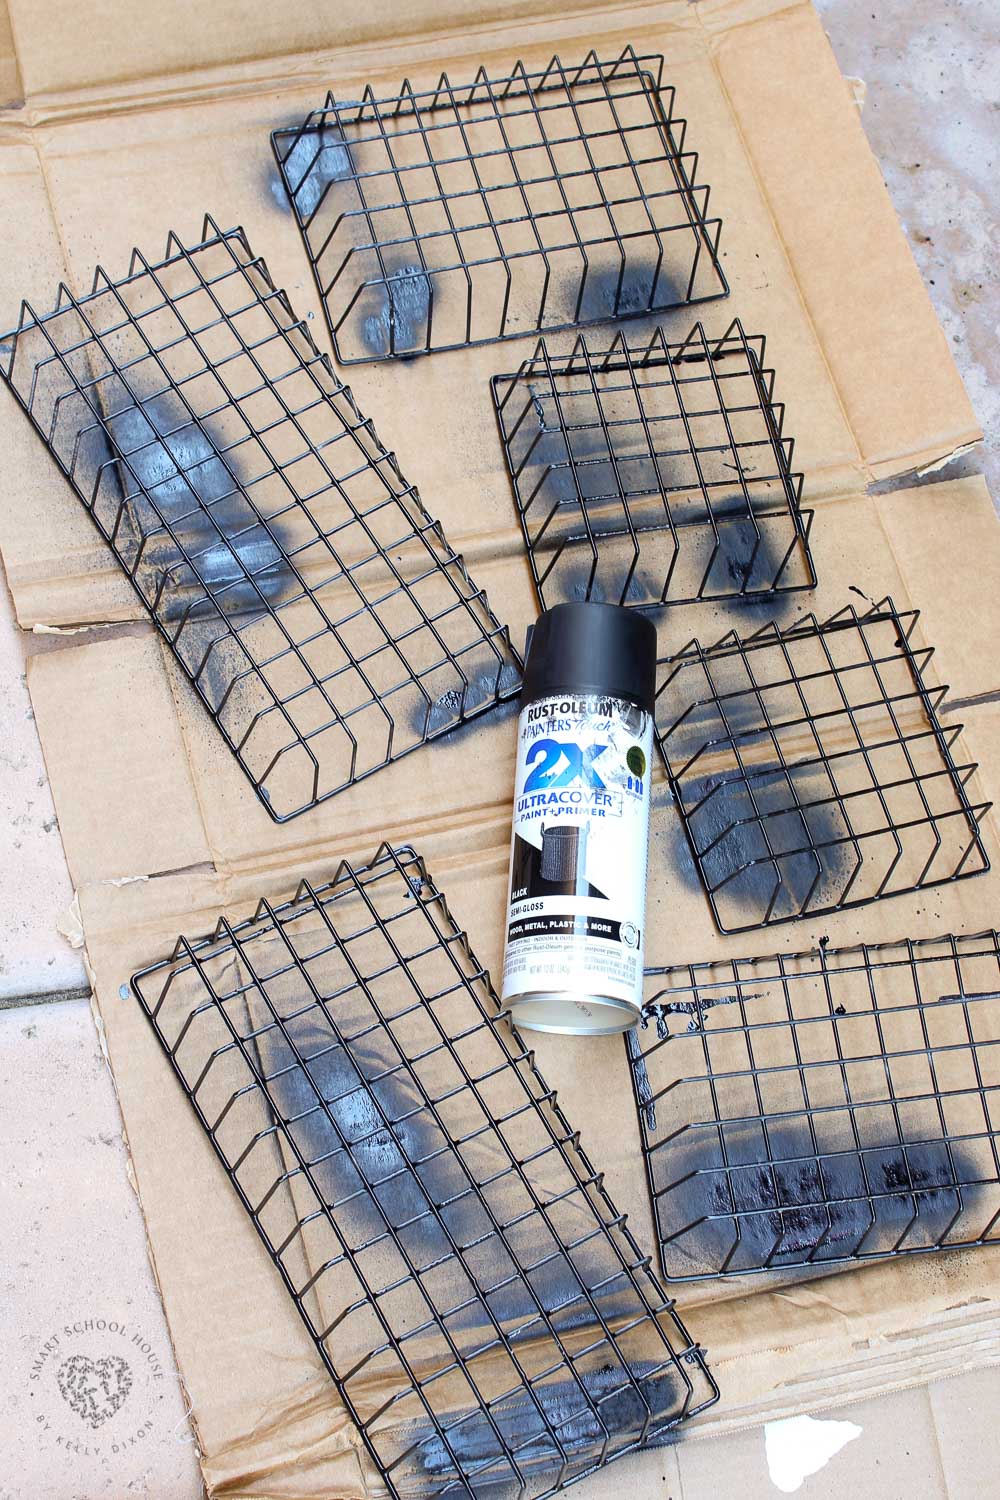 Spray painting baskets for Halloween